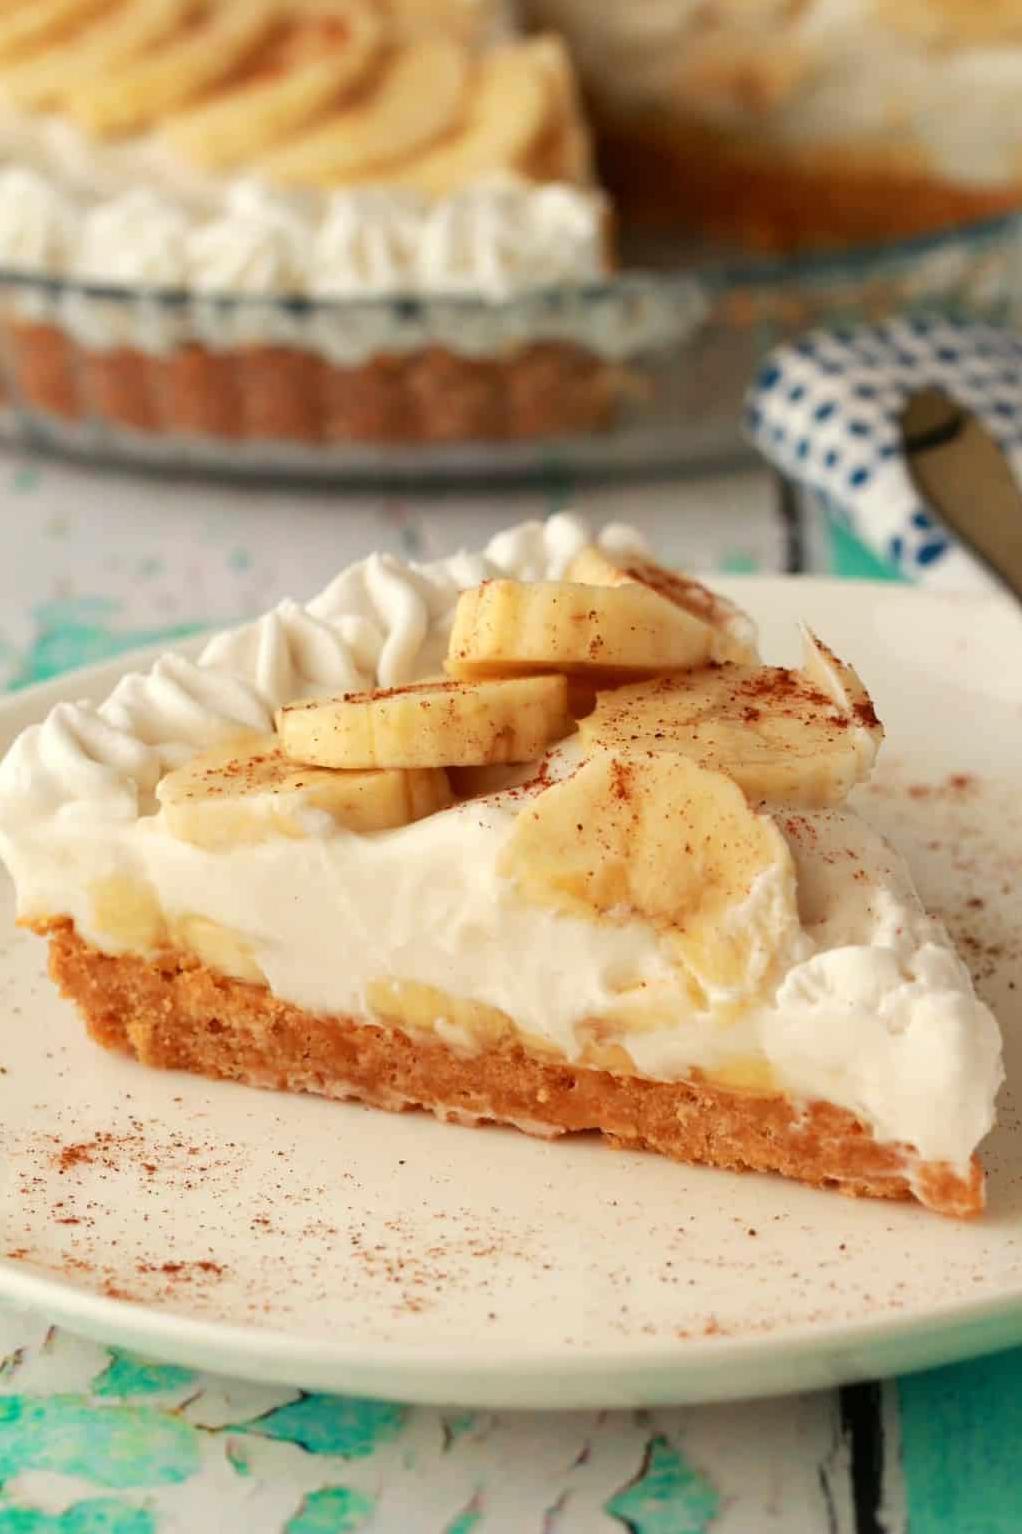  Get ready to swoon over this vegan banana cream pie.